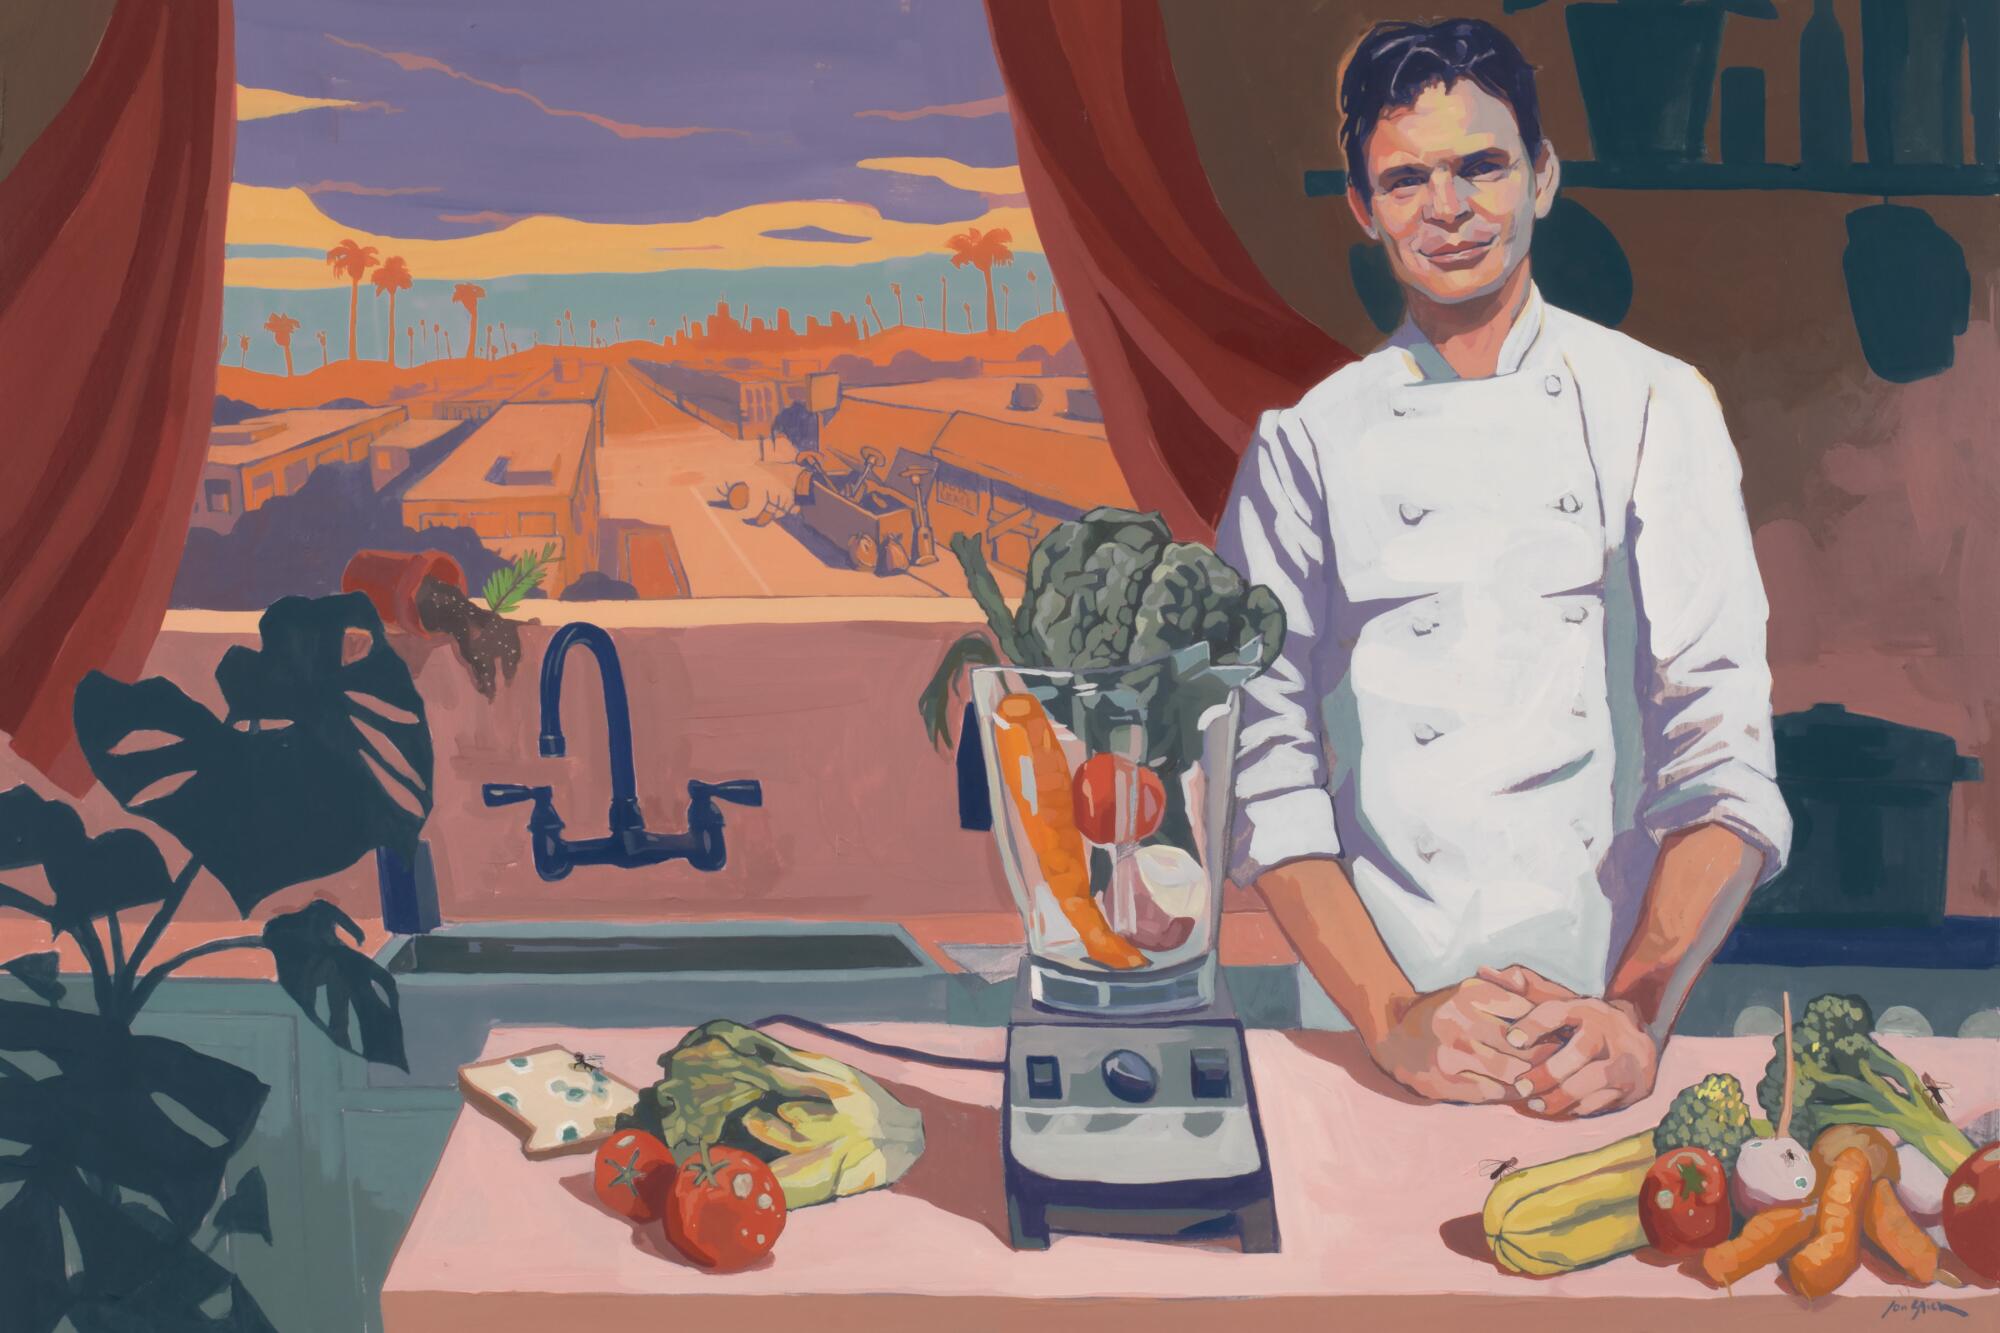 A man in chef's whites stands in a kitchen with a blender full of vegetables